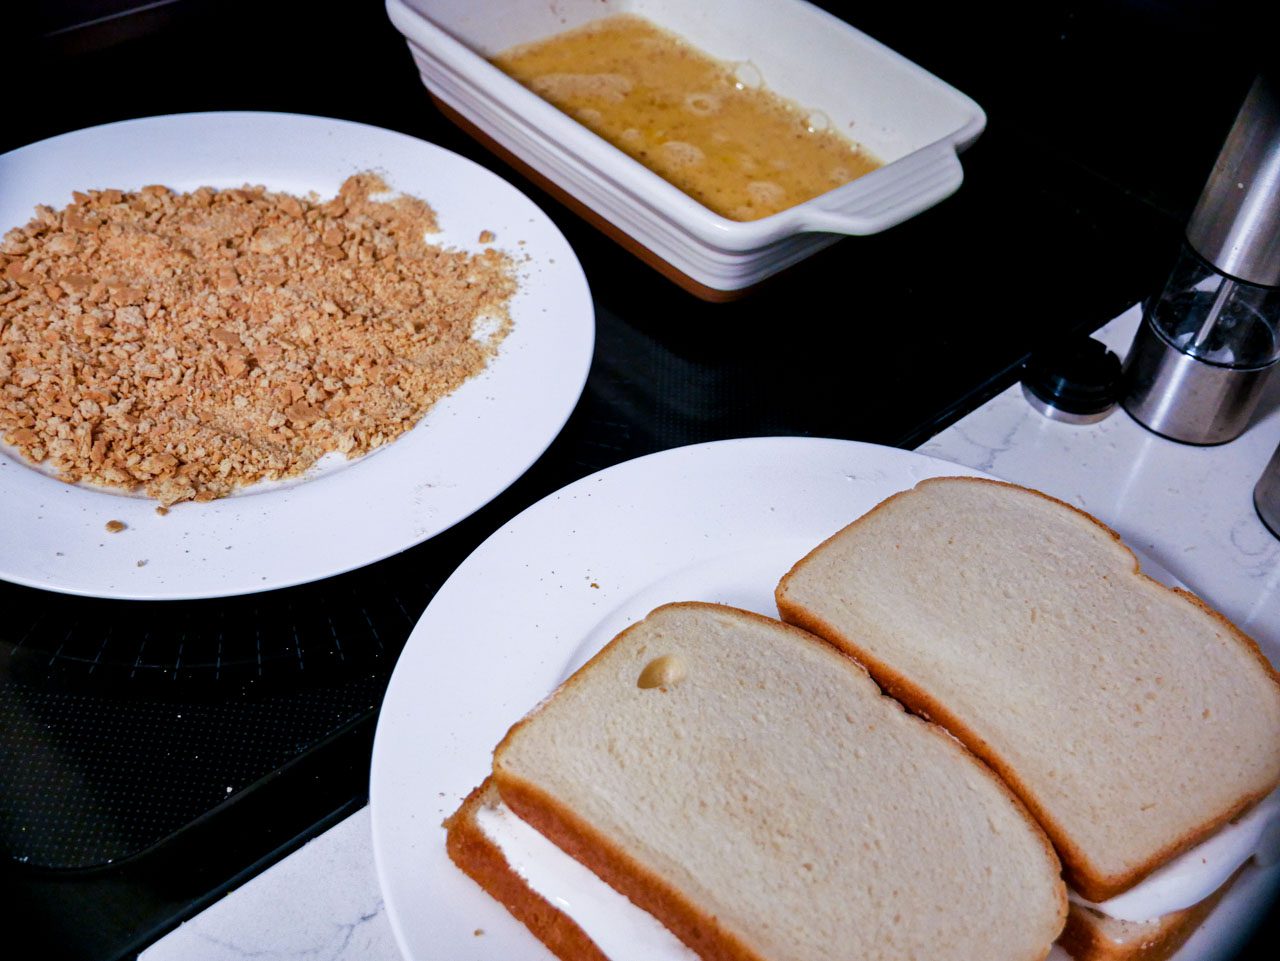 Egg wash in a dish, crushed graham cracker on a separate plate and prepared sandwiches ready to be breaded.